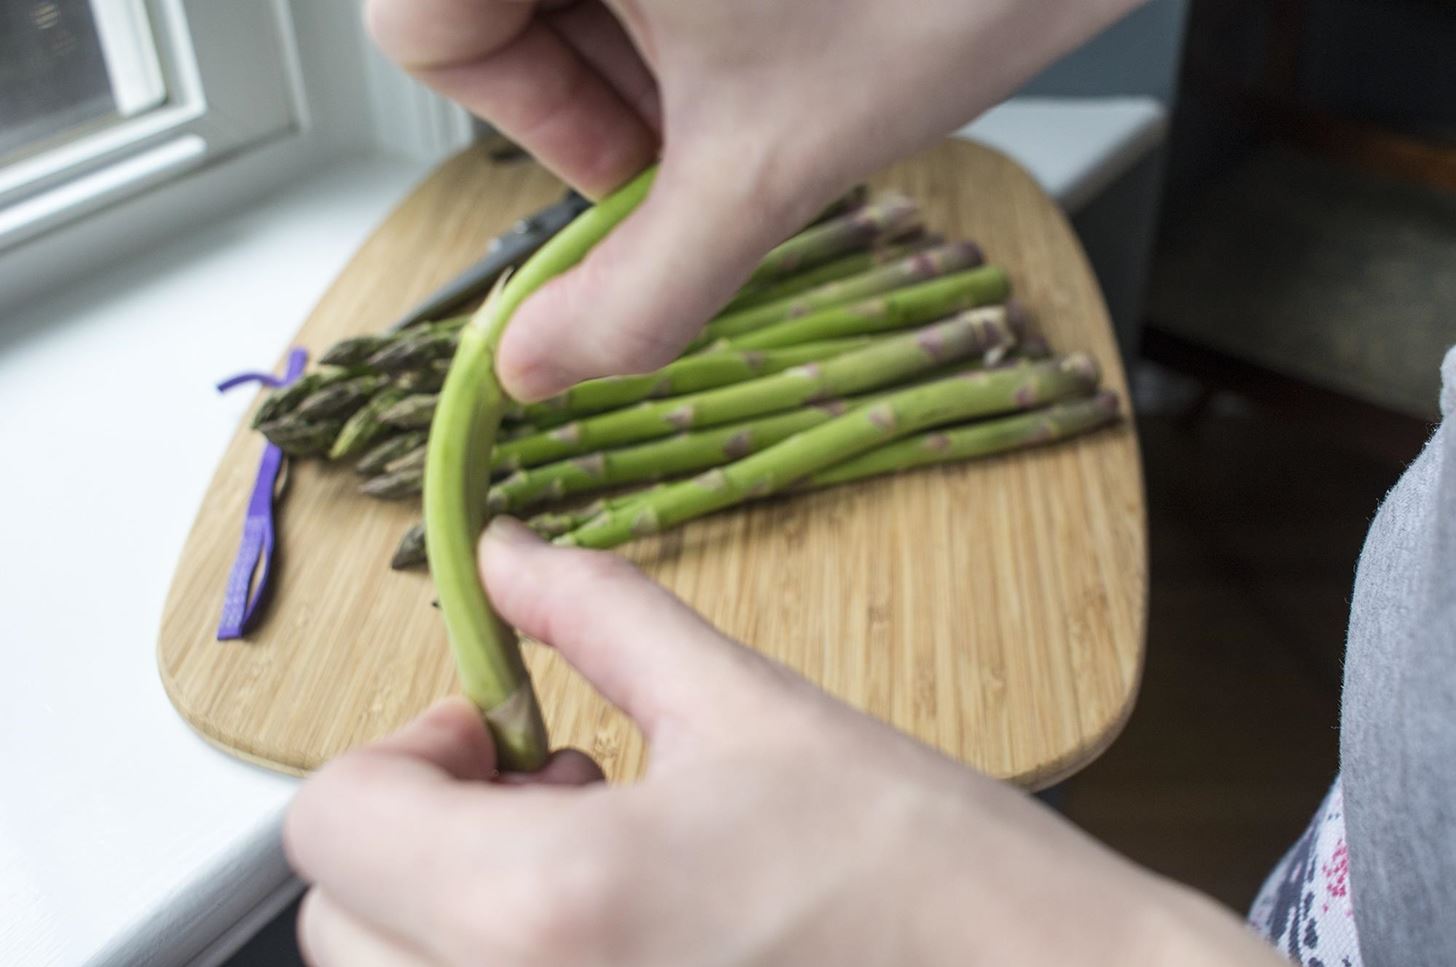 Save Time Prepping Veggies with These Insider Tricks